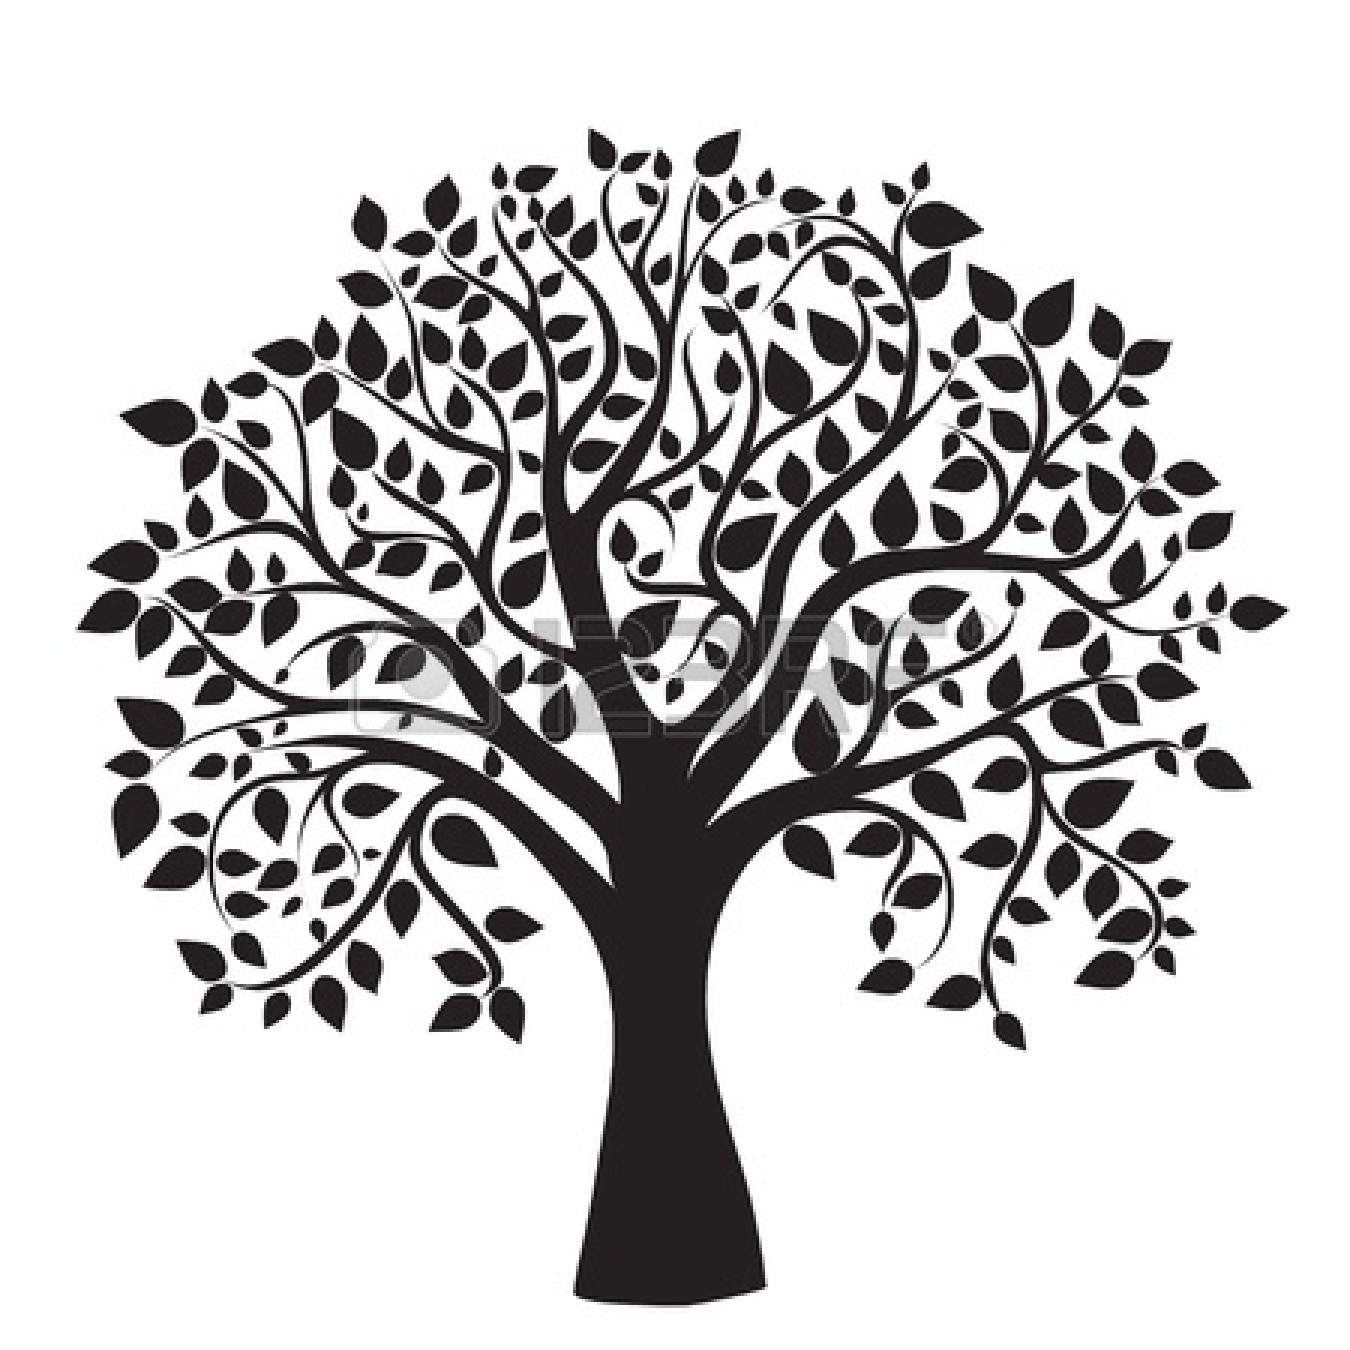 Free Family Tree Clip Clip Art Black And White Family Tree Images